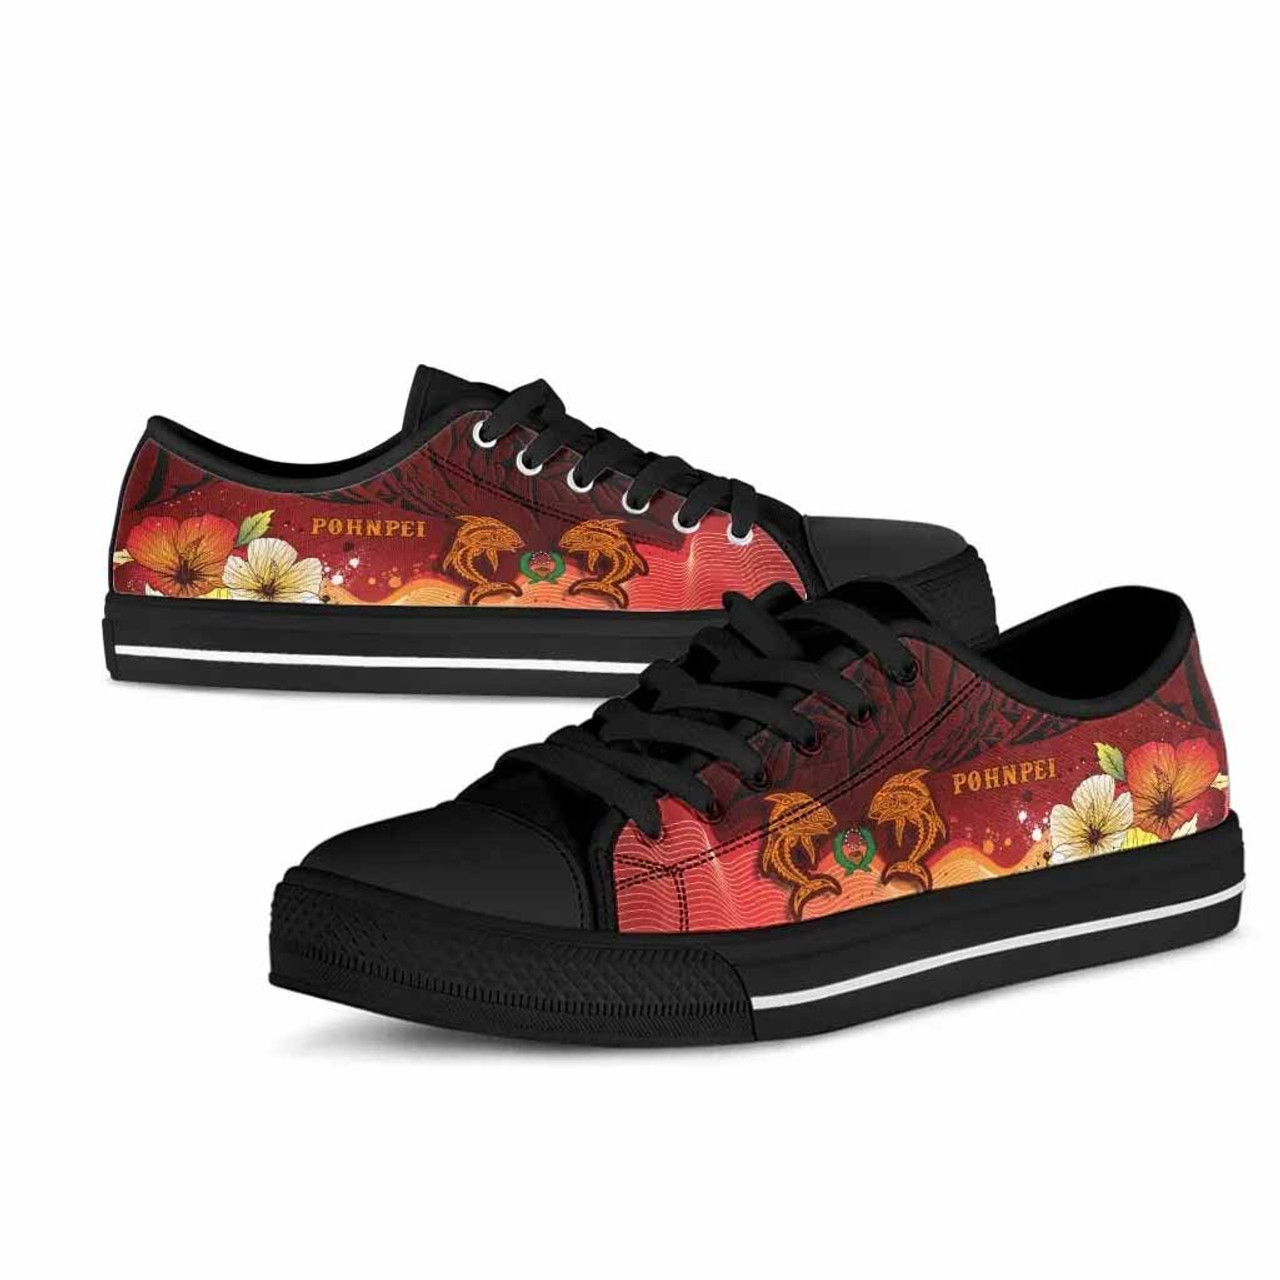 Pohnpei Low Top Shoes - Tribal Tuna Fish 4